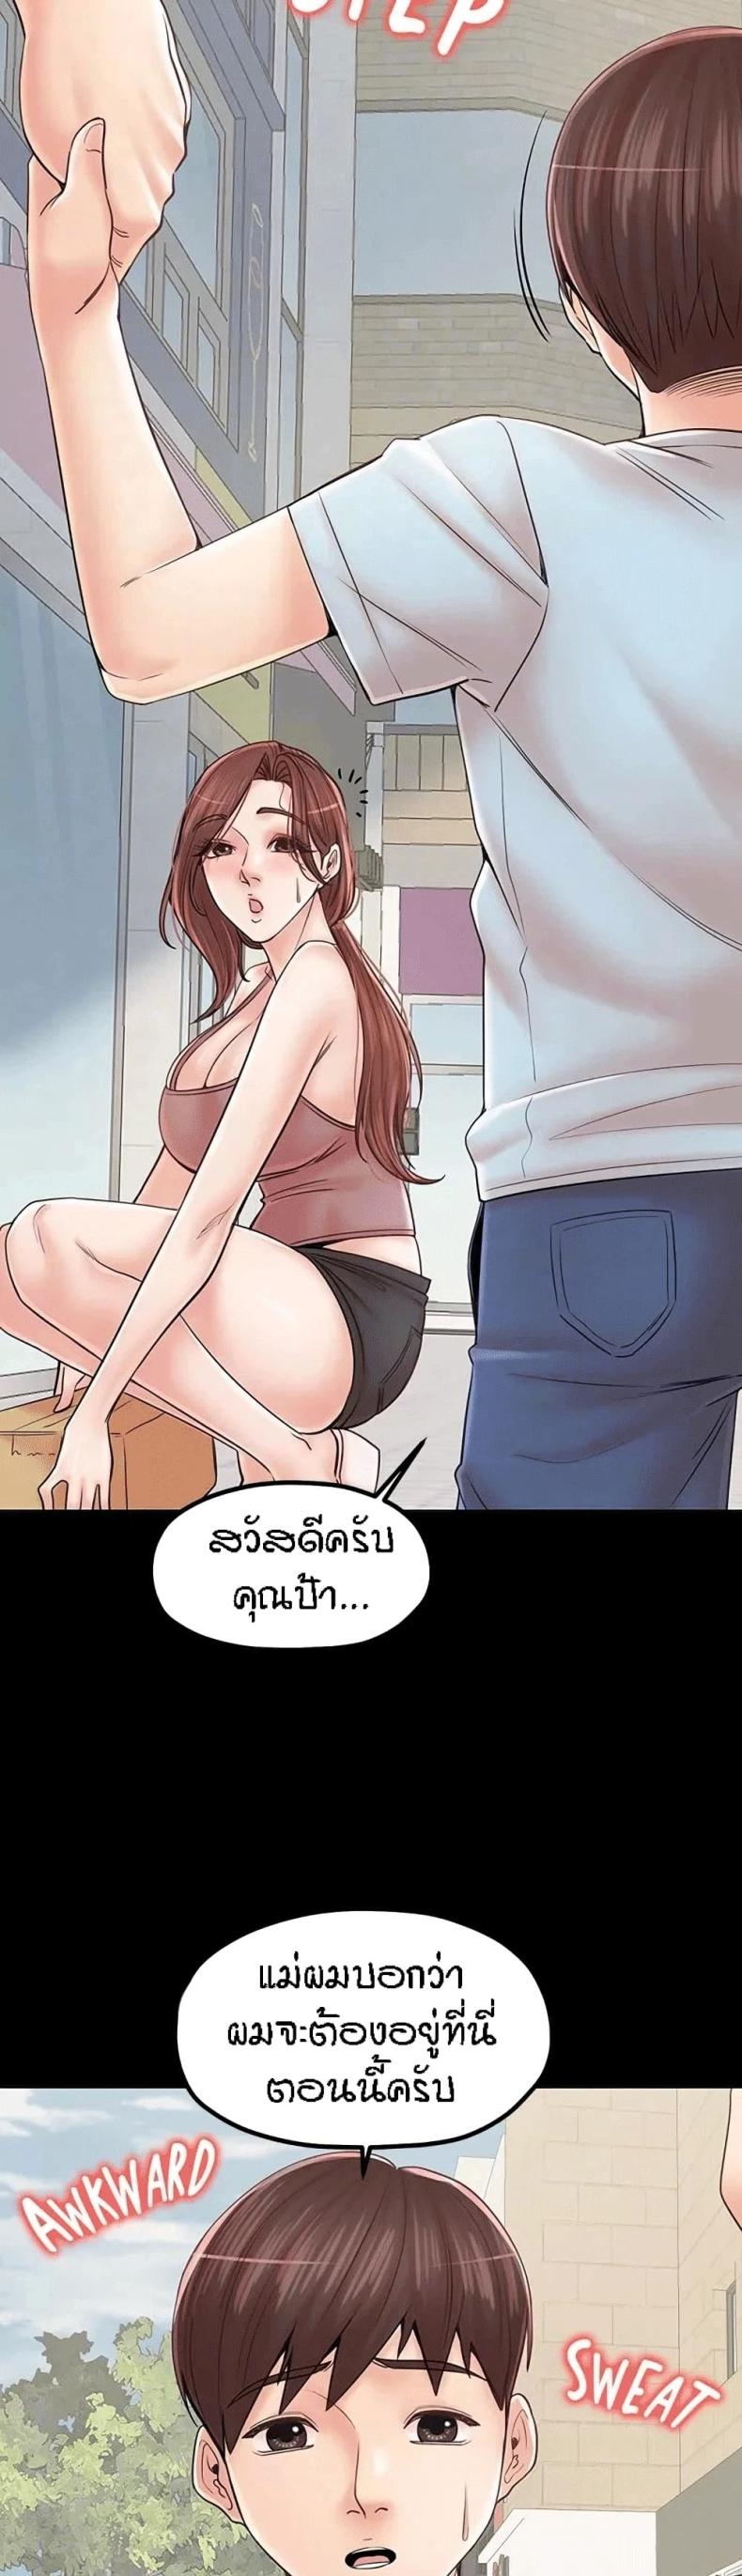 Banging Mother And Daughter 33-0 ภาพที่ 14